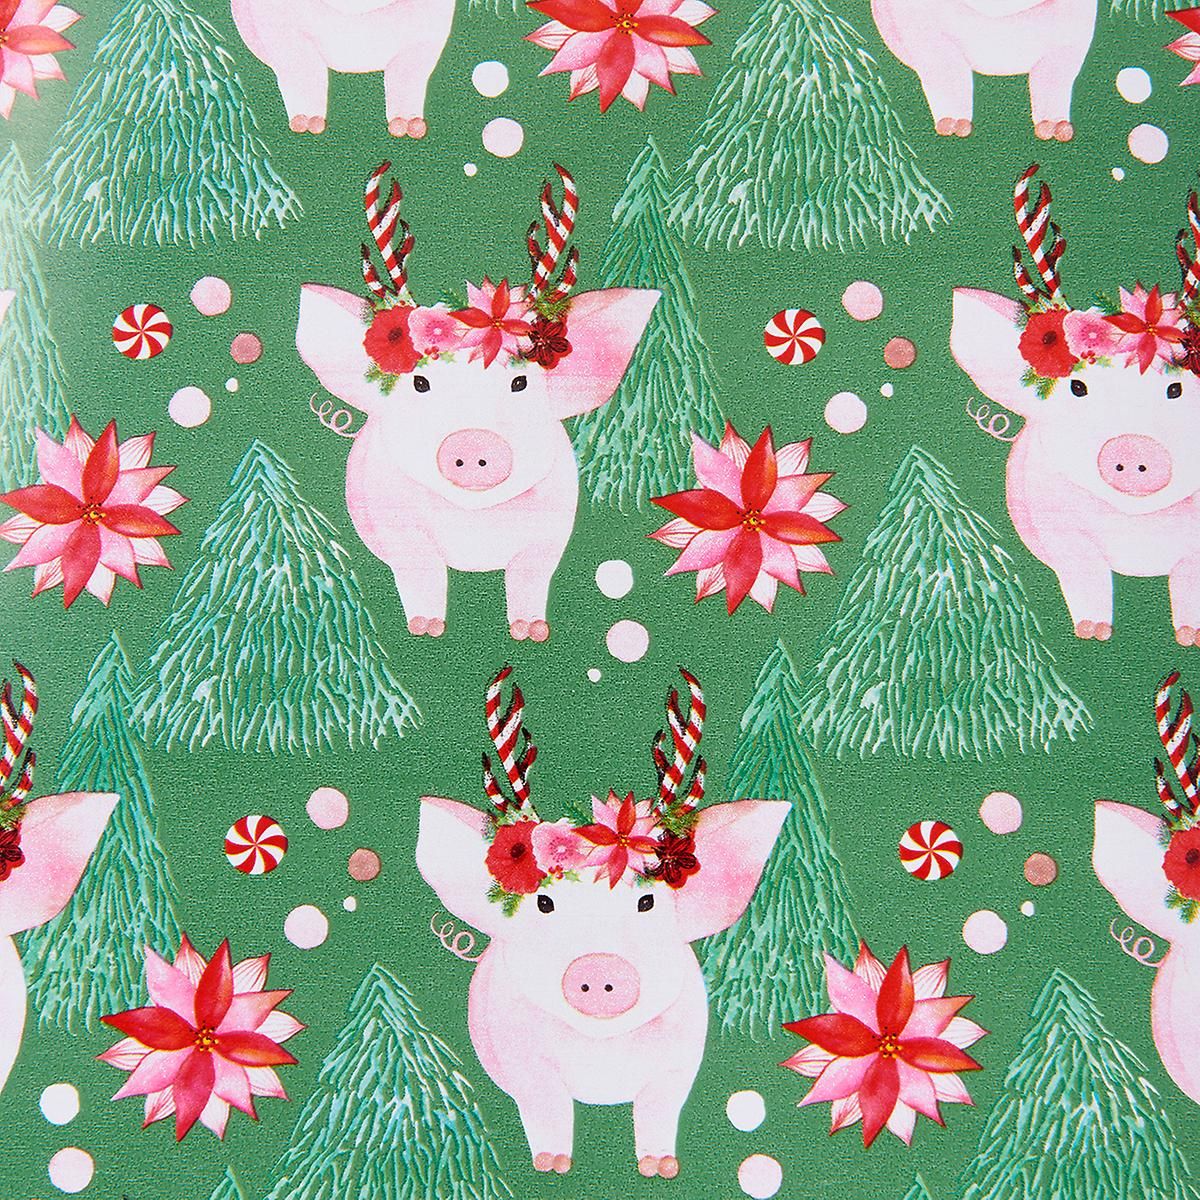 Pigs & Poinsettias Wrapping Paper | The Container Store